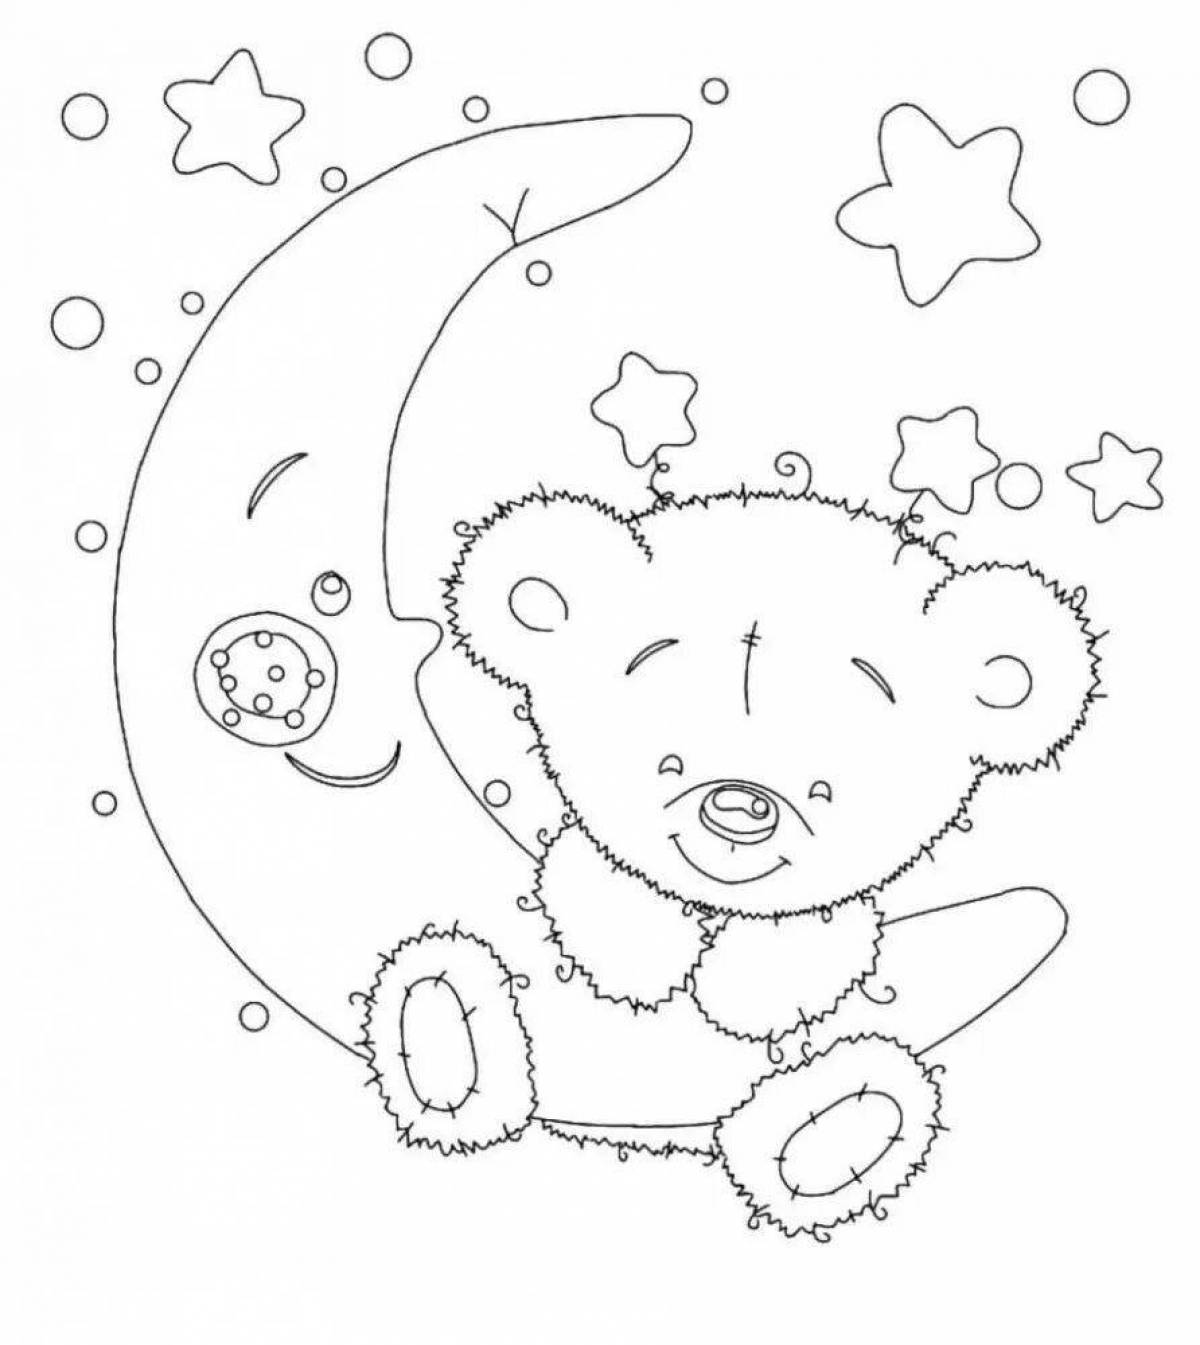 Fancy bear on the moon coloring page